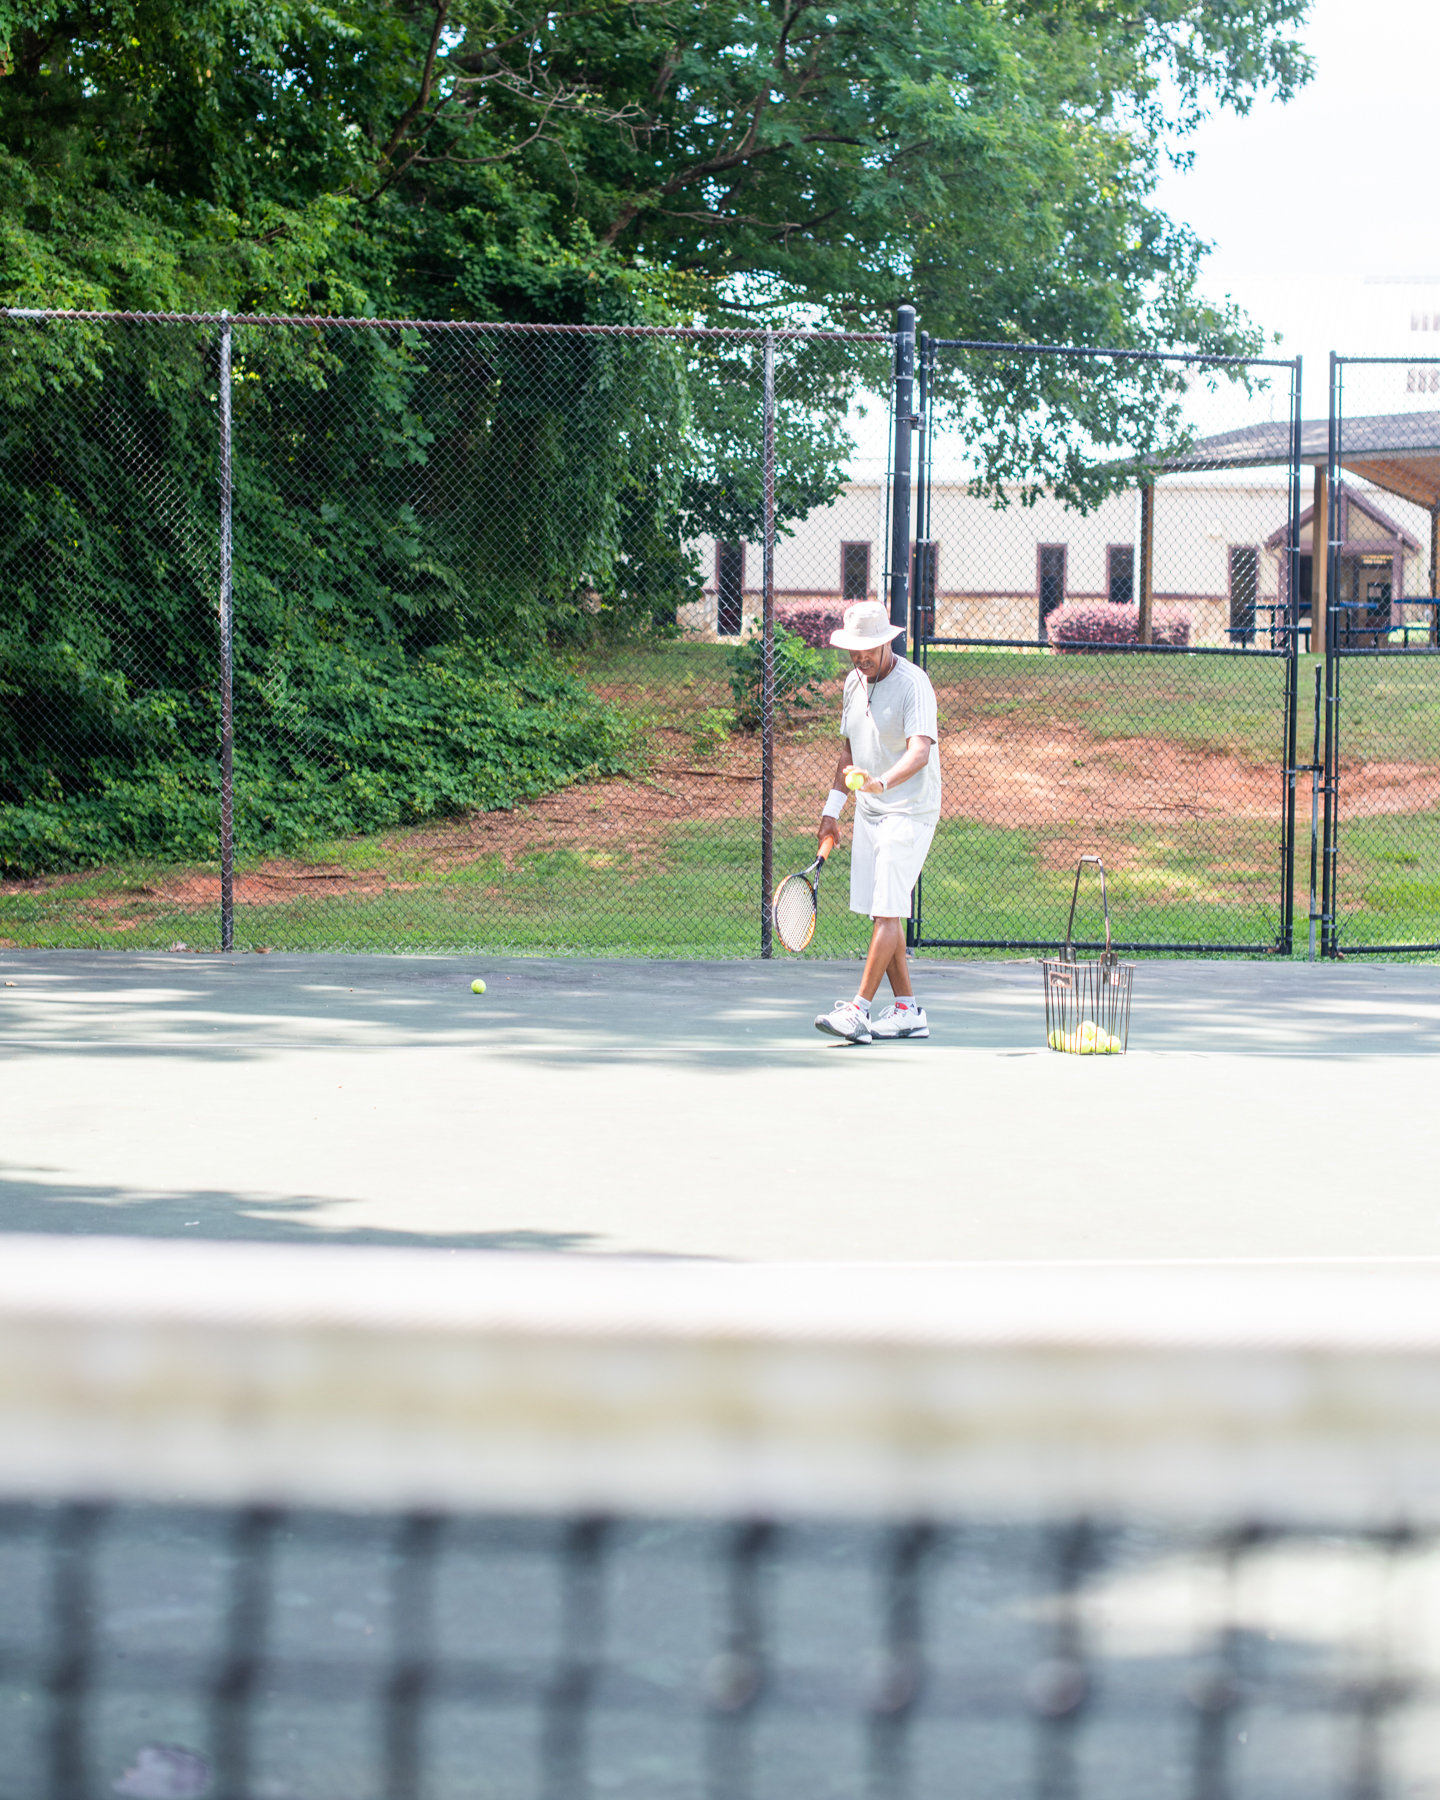 Tennis director prepares to serve a ball at the Oak Hollow Tennis Center in High Point, NC.